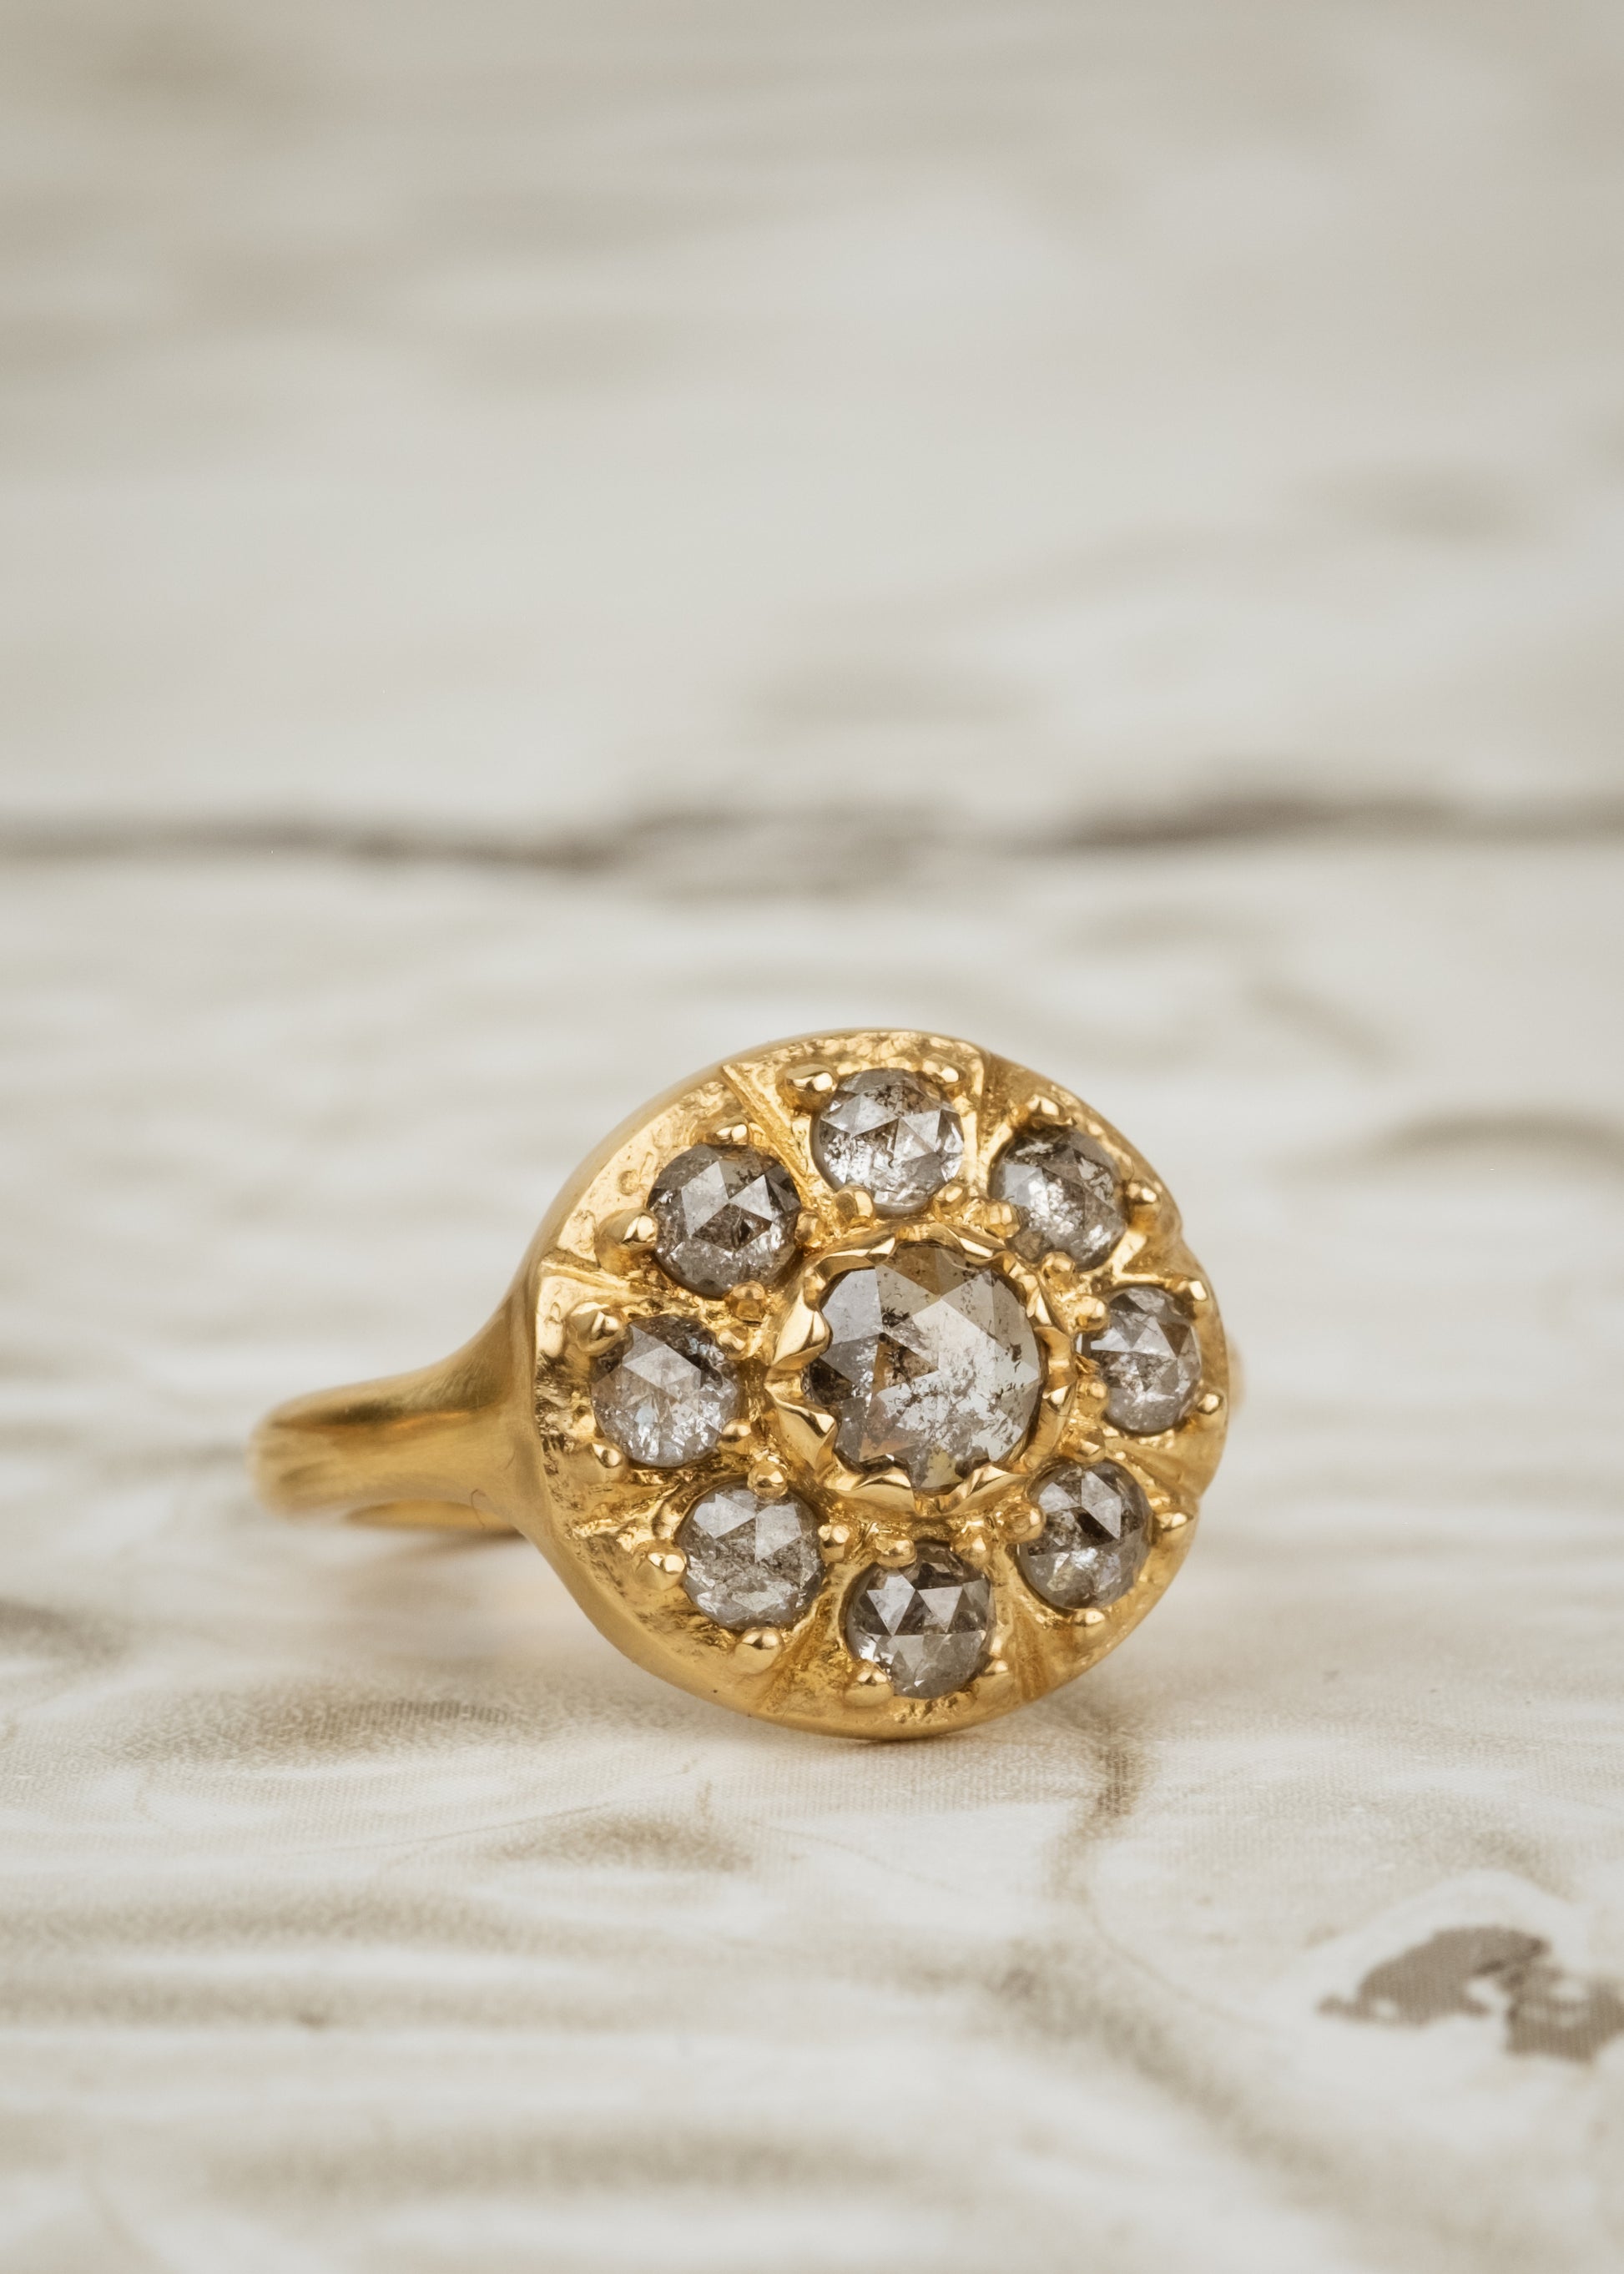 Capturing the richness and romance of its eponymous era, the Georgian ring boasts an exquisite arrangement of rose cut diamonds that celebrates the marriage between gold and stone. As timeless as it is beautiful, this piece is an instant heirloom—classic, ornate and otherworldly.